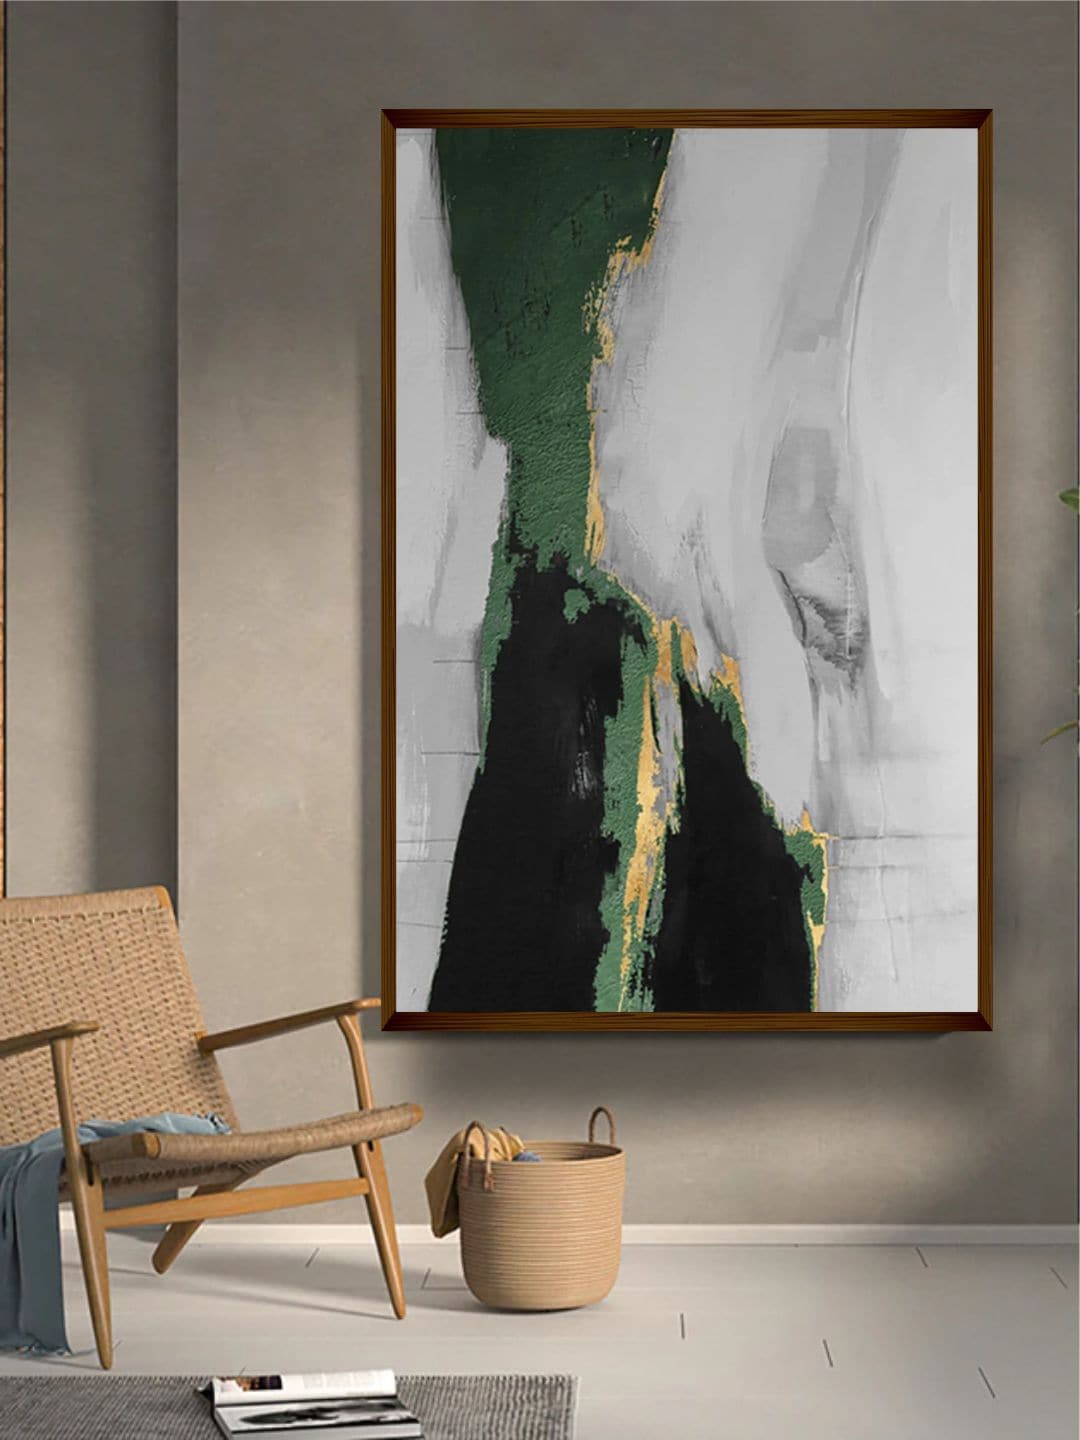 Buy The Art House Green & White Abstract Painting Framed Wall Art ...